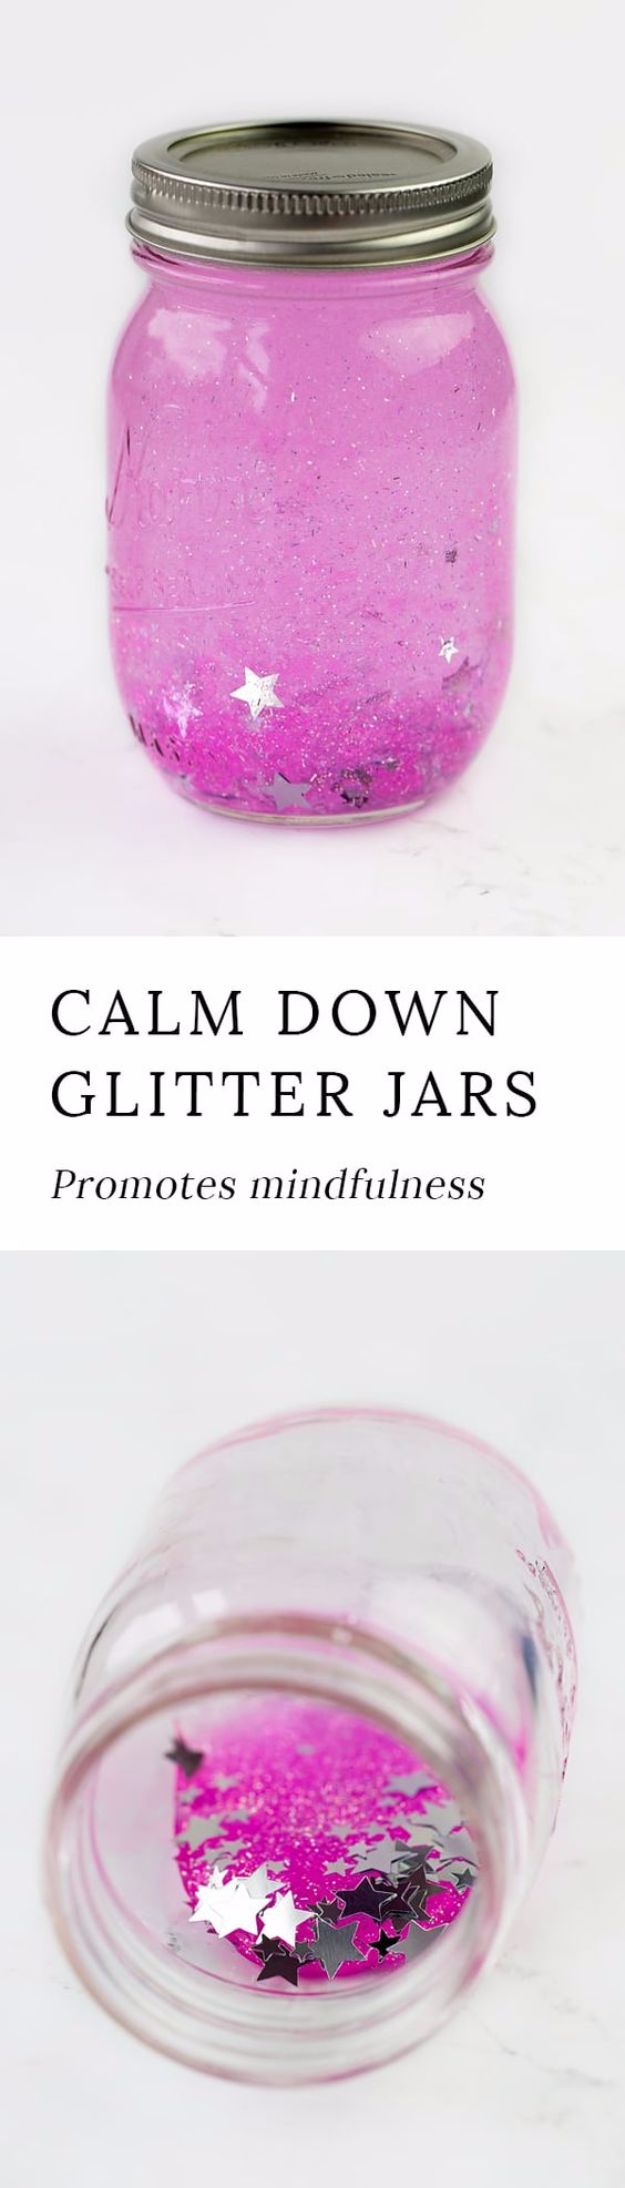 DIY Ideas WIth Glitter - Calm Down Glitter Jars - Easy Crafts and Projects for Decoration, Gifts, and Bedroom Decor - How To Make Ombre, Mod Podge and Glitter Mason Jar Gift Ideas For Teens - Easy Clothes and Makeup Crafts For Teenagers #diyideas #glitter #crafts